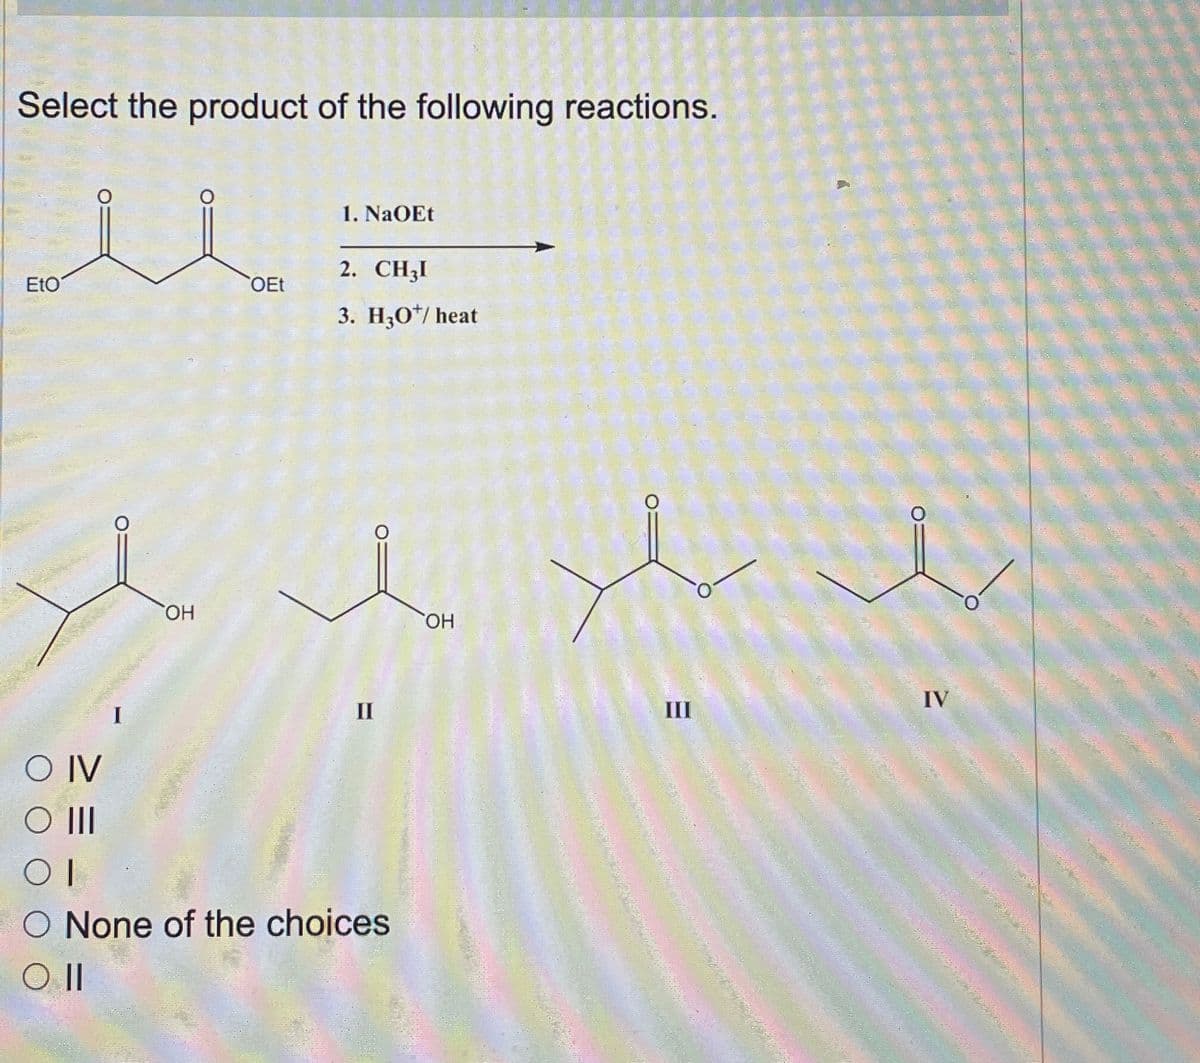 Select the product of the following reactions.
1. NaOEt
2. CHẠI
EtO
OEt
3. H3O+/heat
O IV
○ III
I
ὋΗ
ΟΗ
O None of the choices
Oll
IV
III